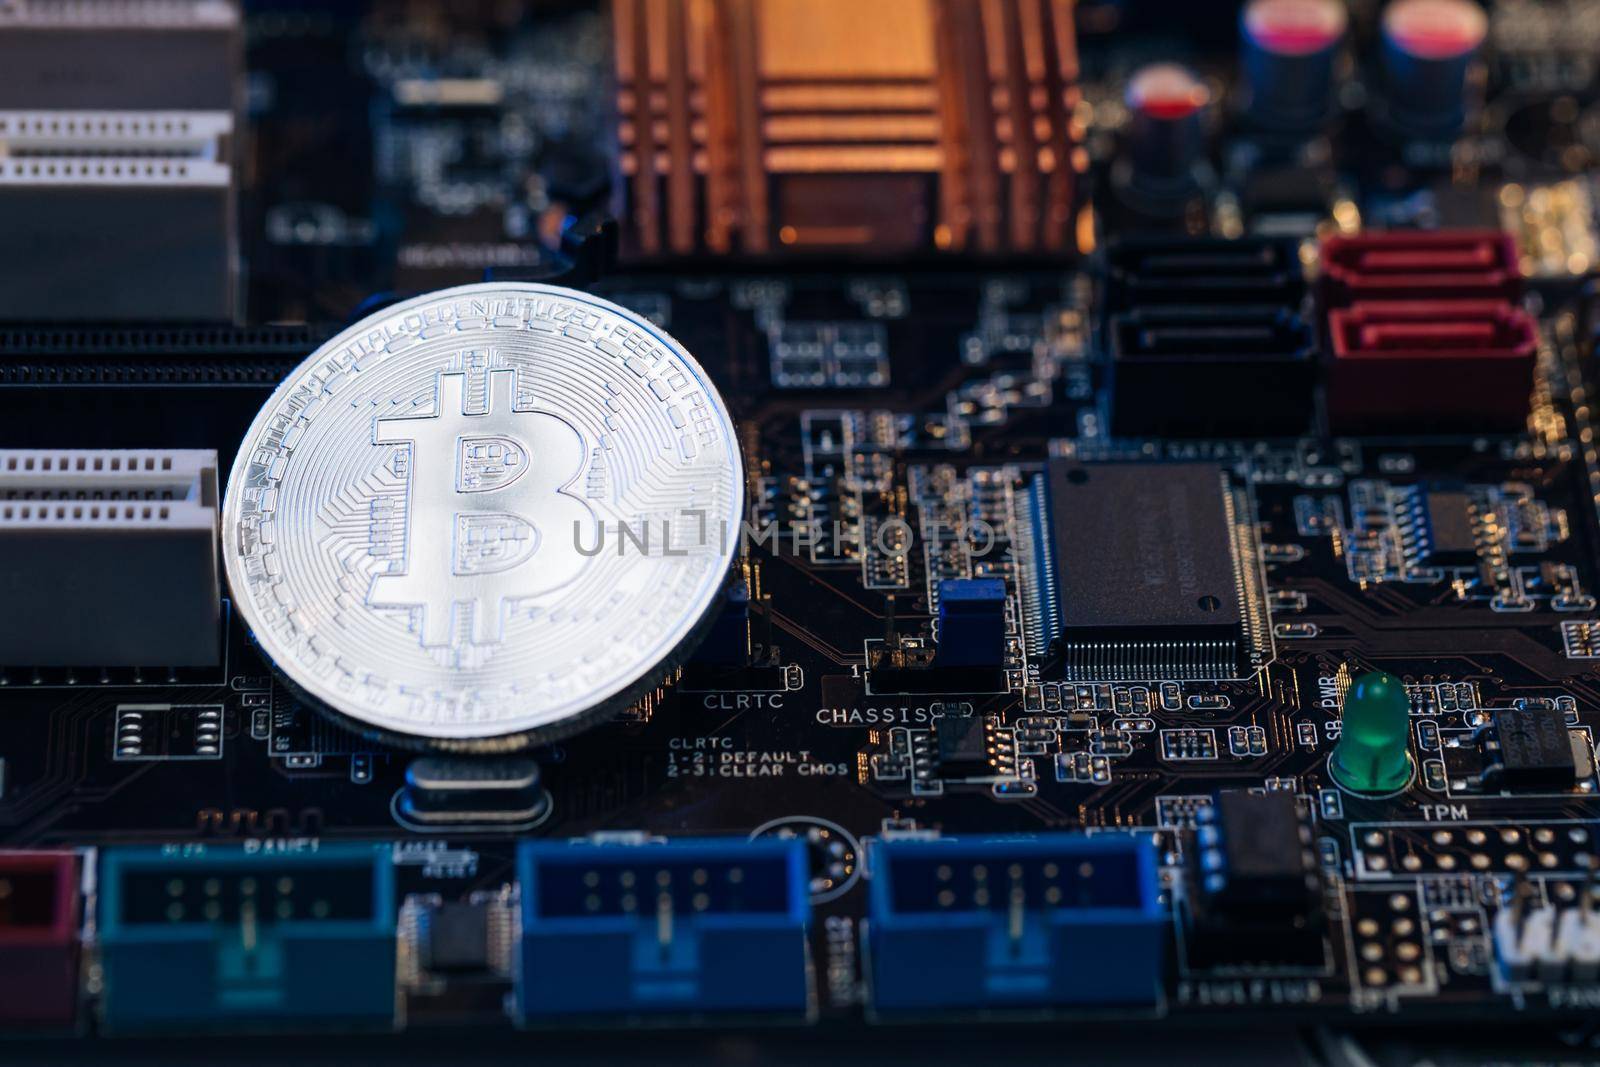 Bitcoin. Crypto currency Silver Bitcoin, BTC, Bit Coin. Macro shot of Bitcoin coins isolated on motherboard background.